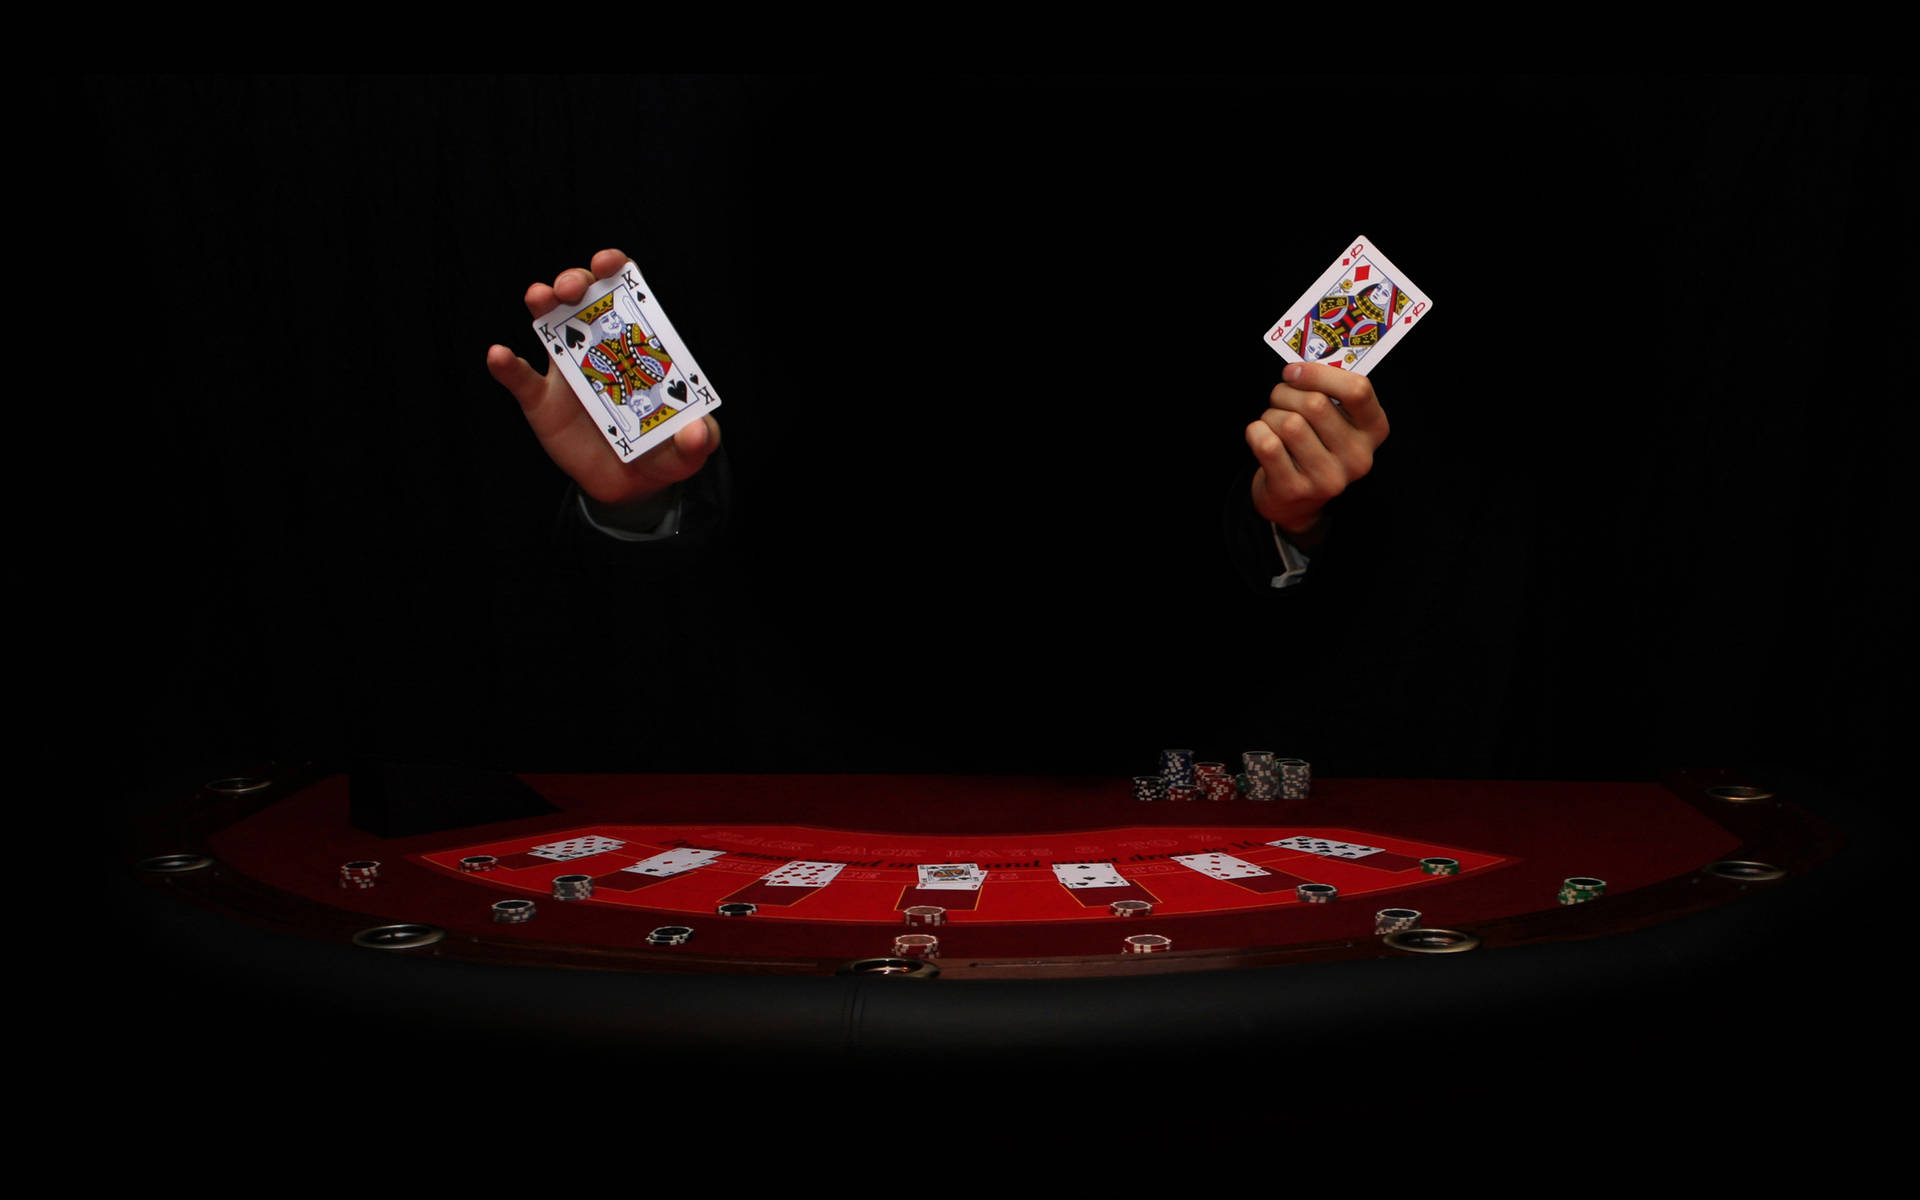 Dark Photo Of Hands Of A Man Baccarat Game Wallpaper